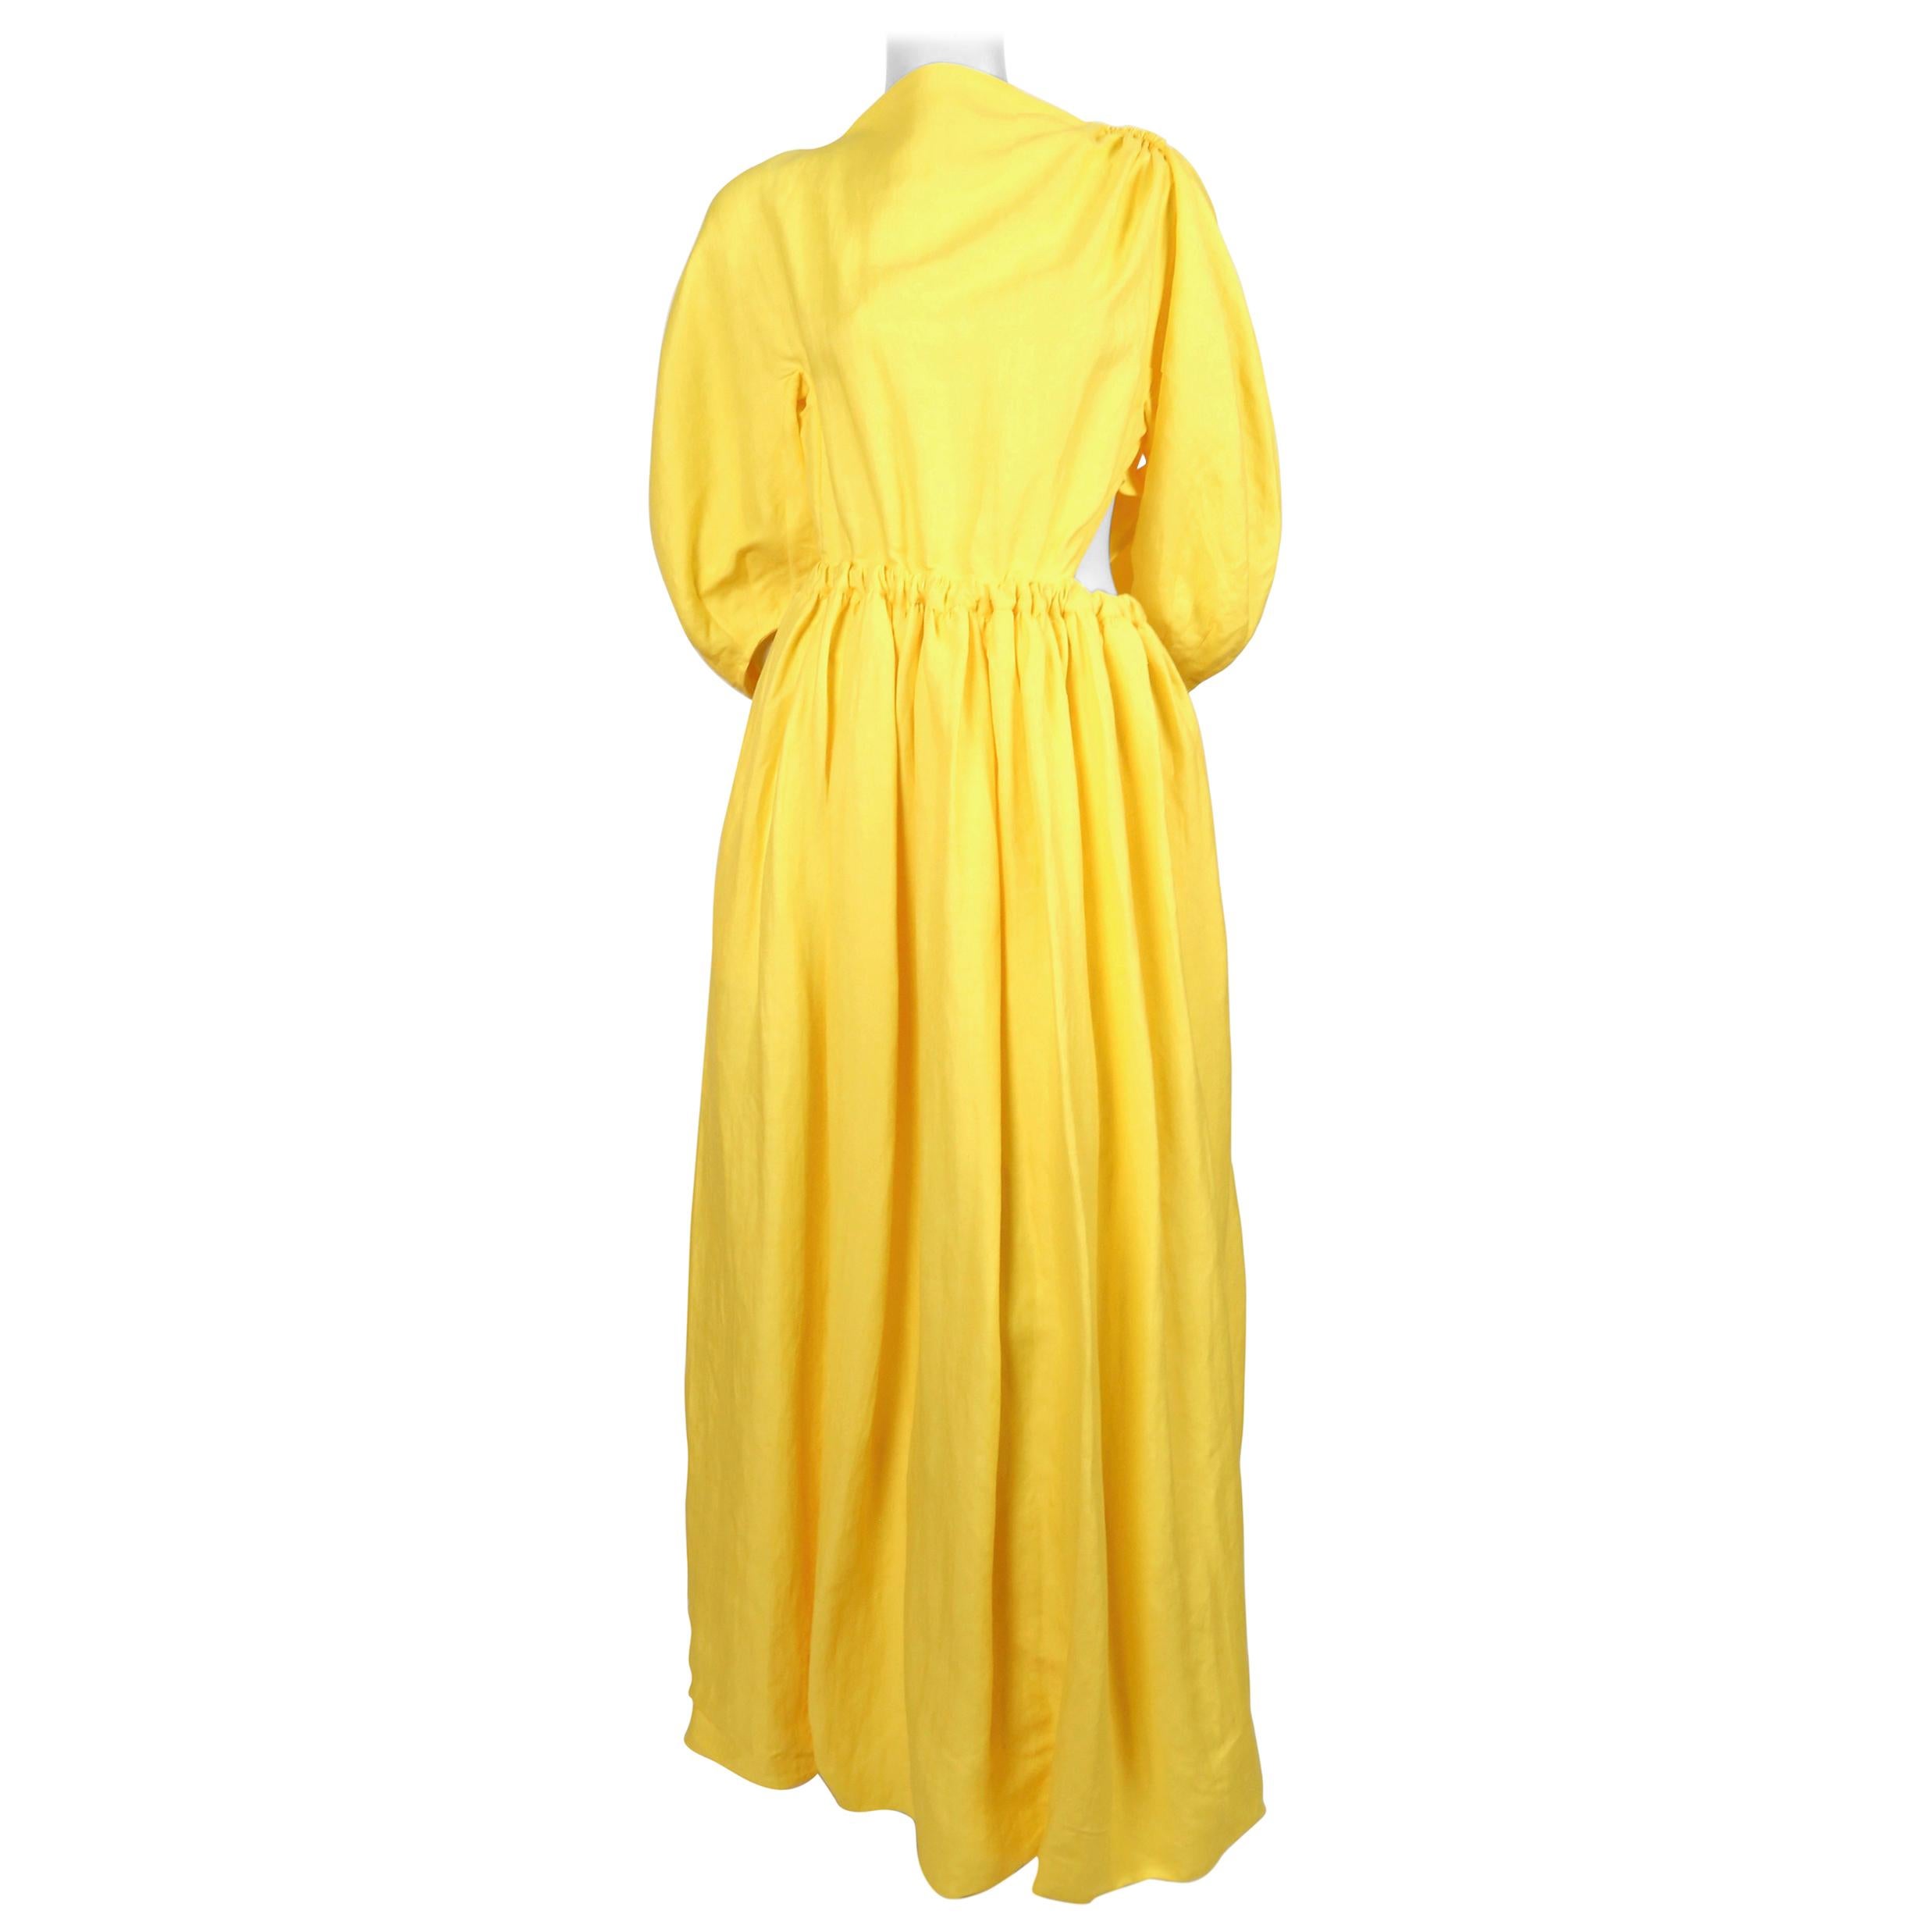 2018 CELINE by PHOEBE PHILO yellow linen maxi dress with cutout